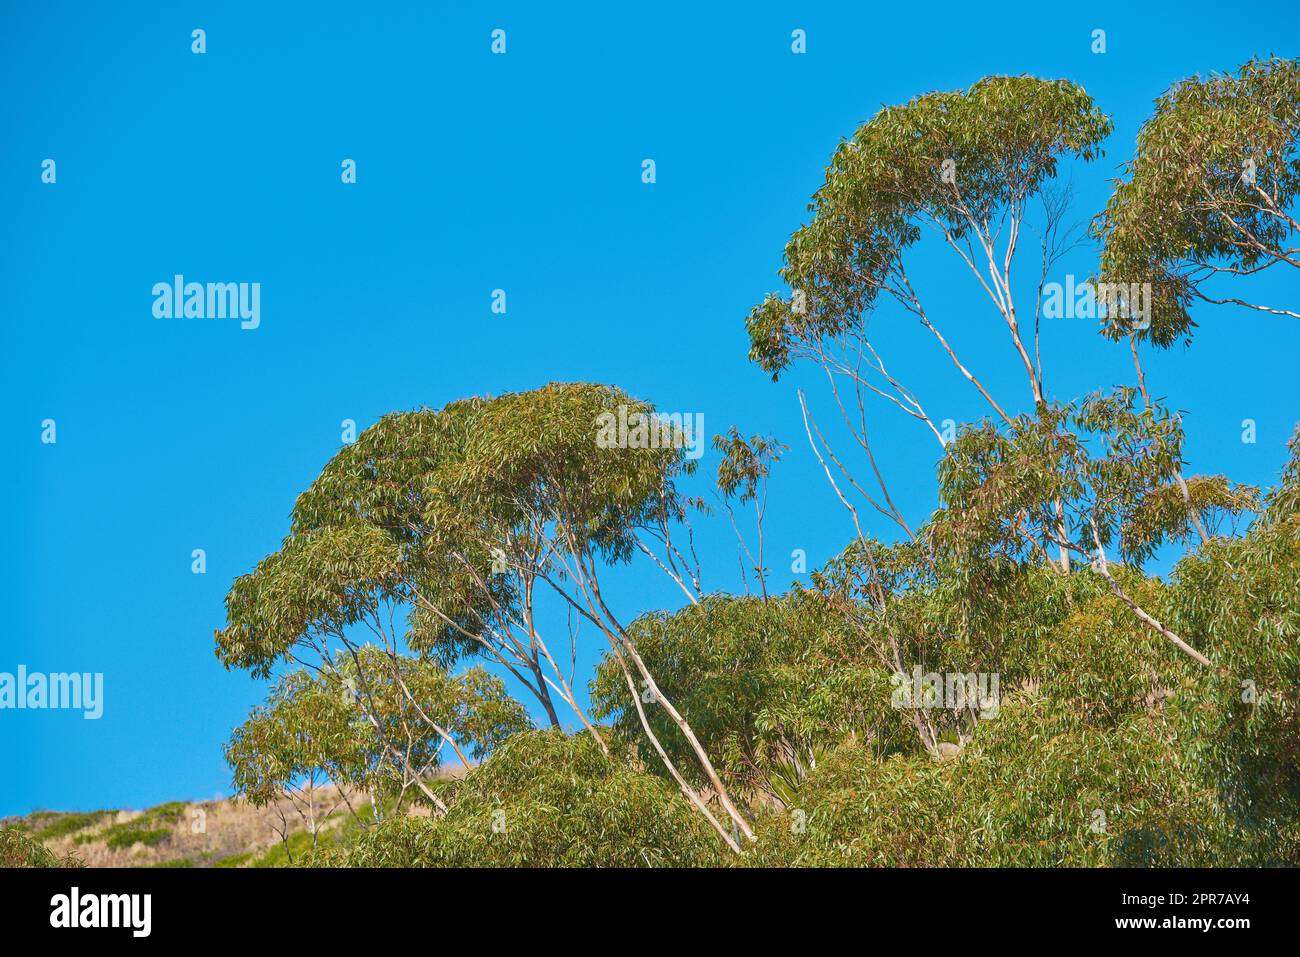 Natural environment with trees and plants, on a bright sunny day in summer with blue skies. Calm, serene and relaxed outdoor area without humans. Beautiful mountainside in South Africa Stock Photo